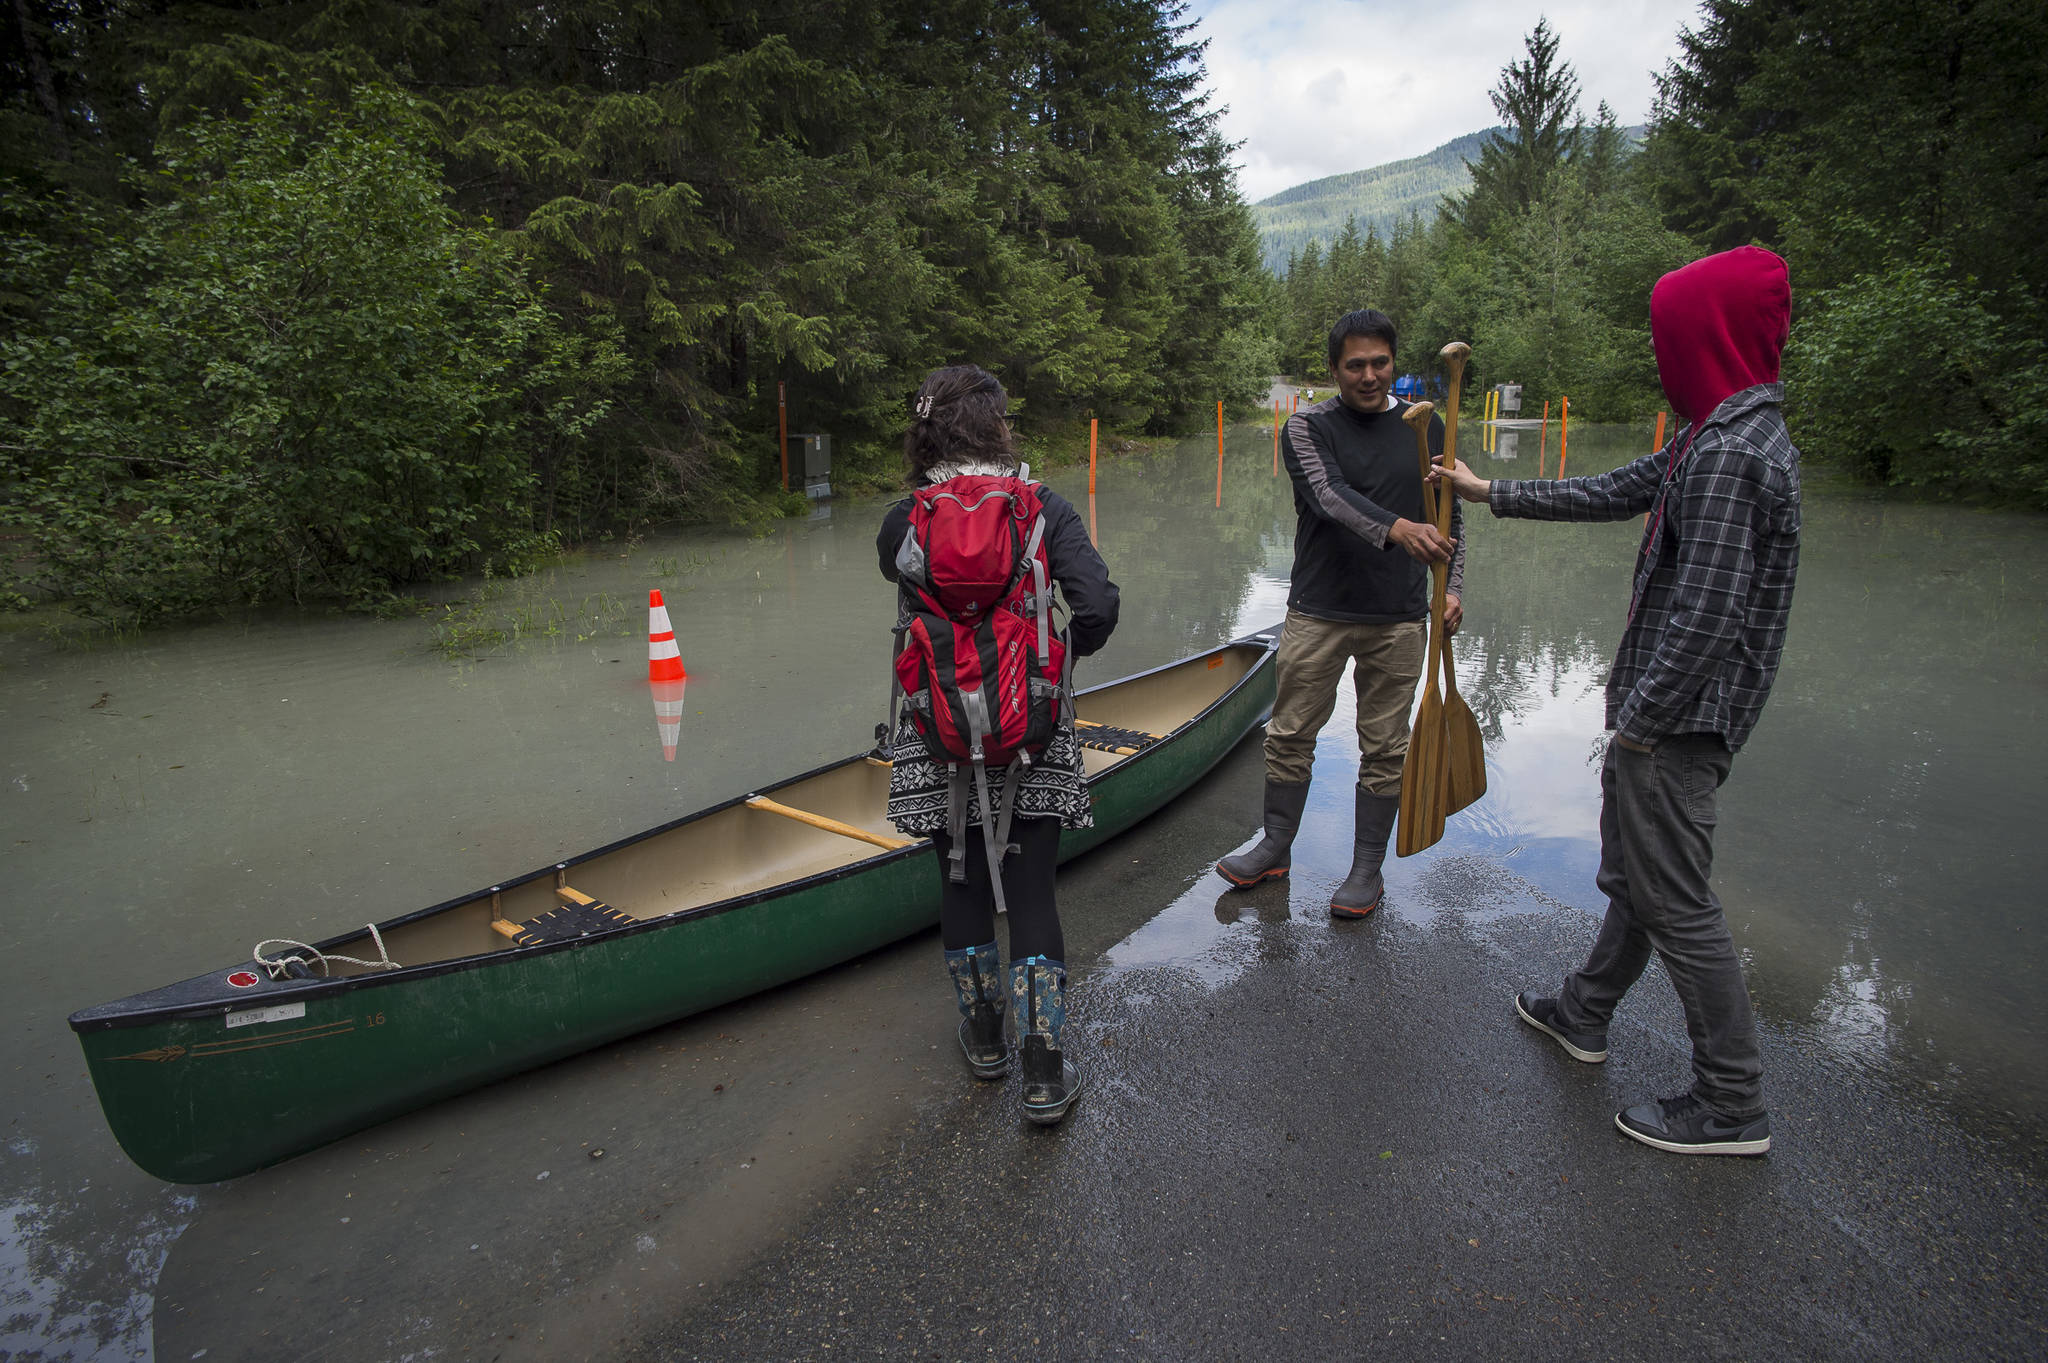 Anthony Mallott, center, hands out paddles as he brings a canoe to help people across a flooded section of View Drive on Thursday, July 19, 2018, after a release of water from Suicide Basin on Wednesday. (Michael Penn | Juneau Empire)